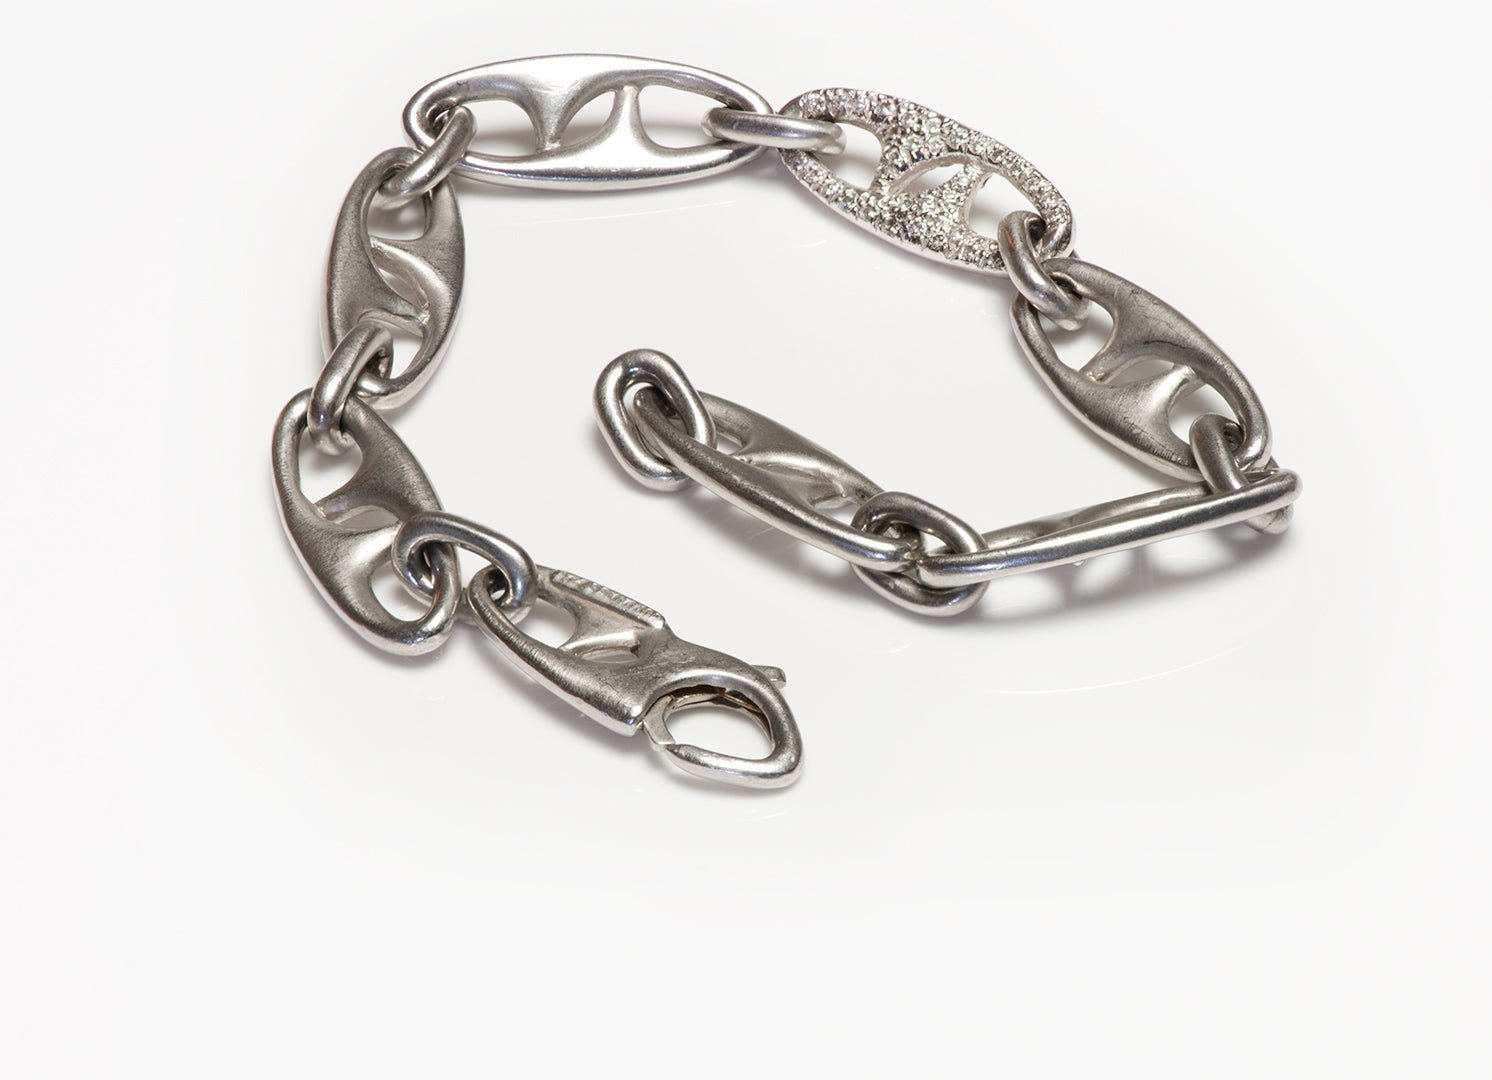 Platinum Vintage Jewelry - The Perfect Place To Buy Them - DSF Antique Jewelry